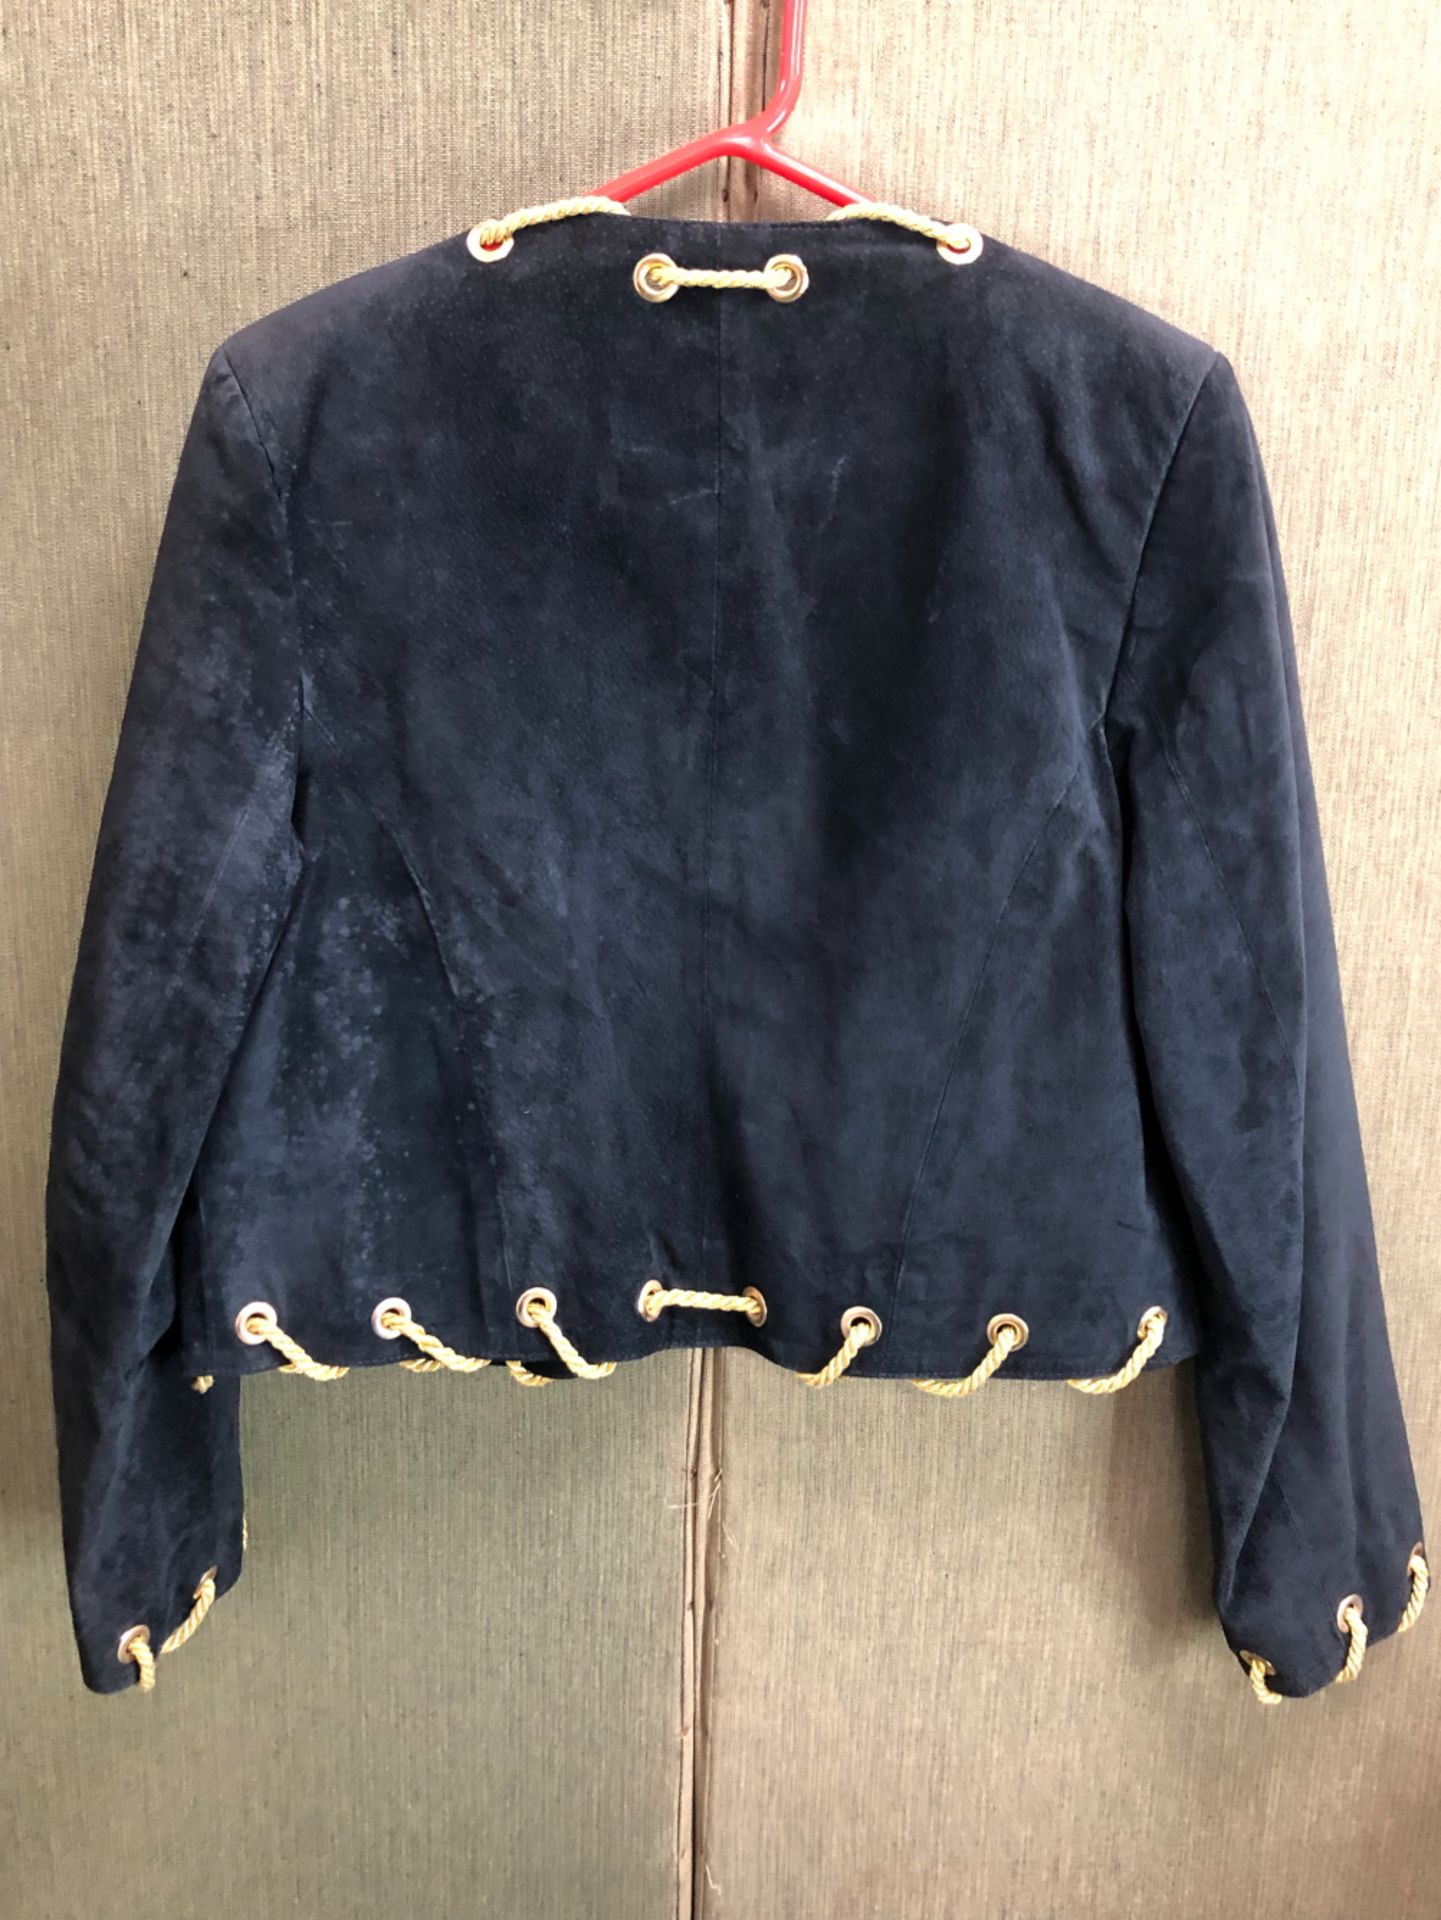 A DARK BLUE PLACE ROYALE SUEDE SHORT JACKET WITH GOLD STAR ROPE DETAIL GB 10/12 - Bild 4 aus 4